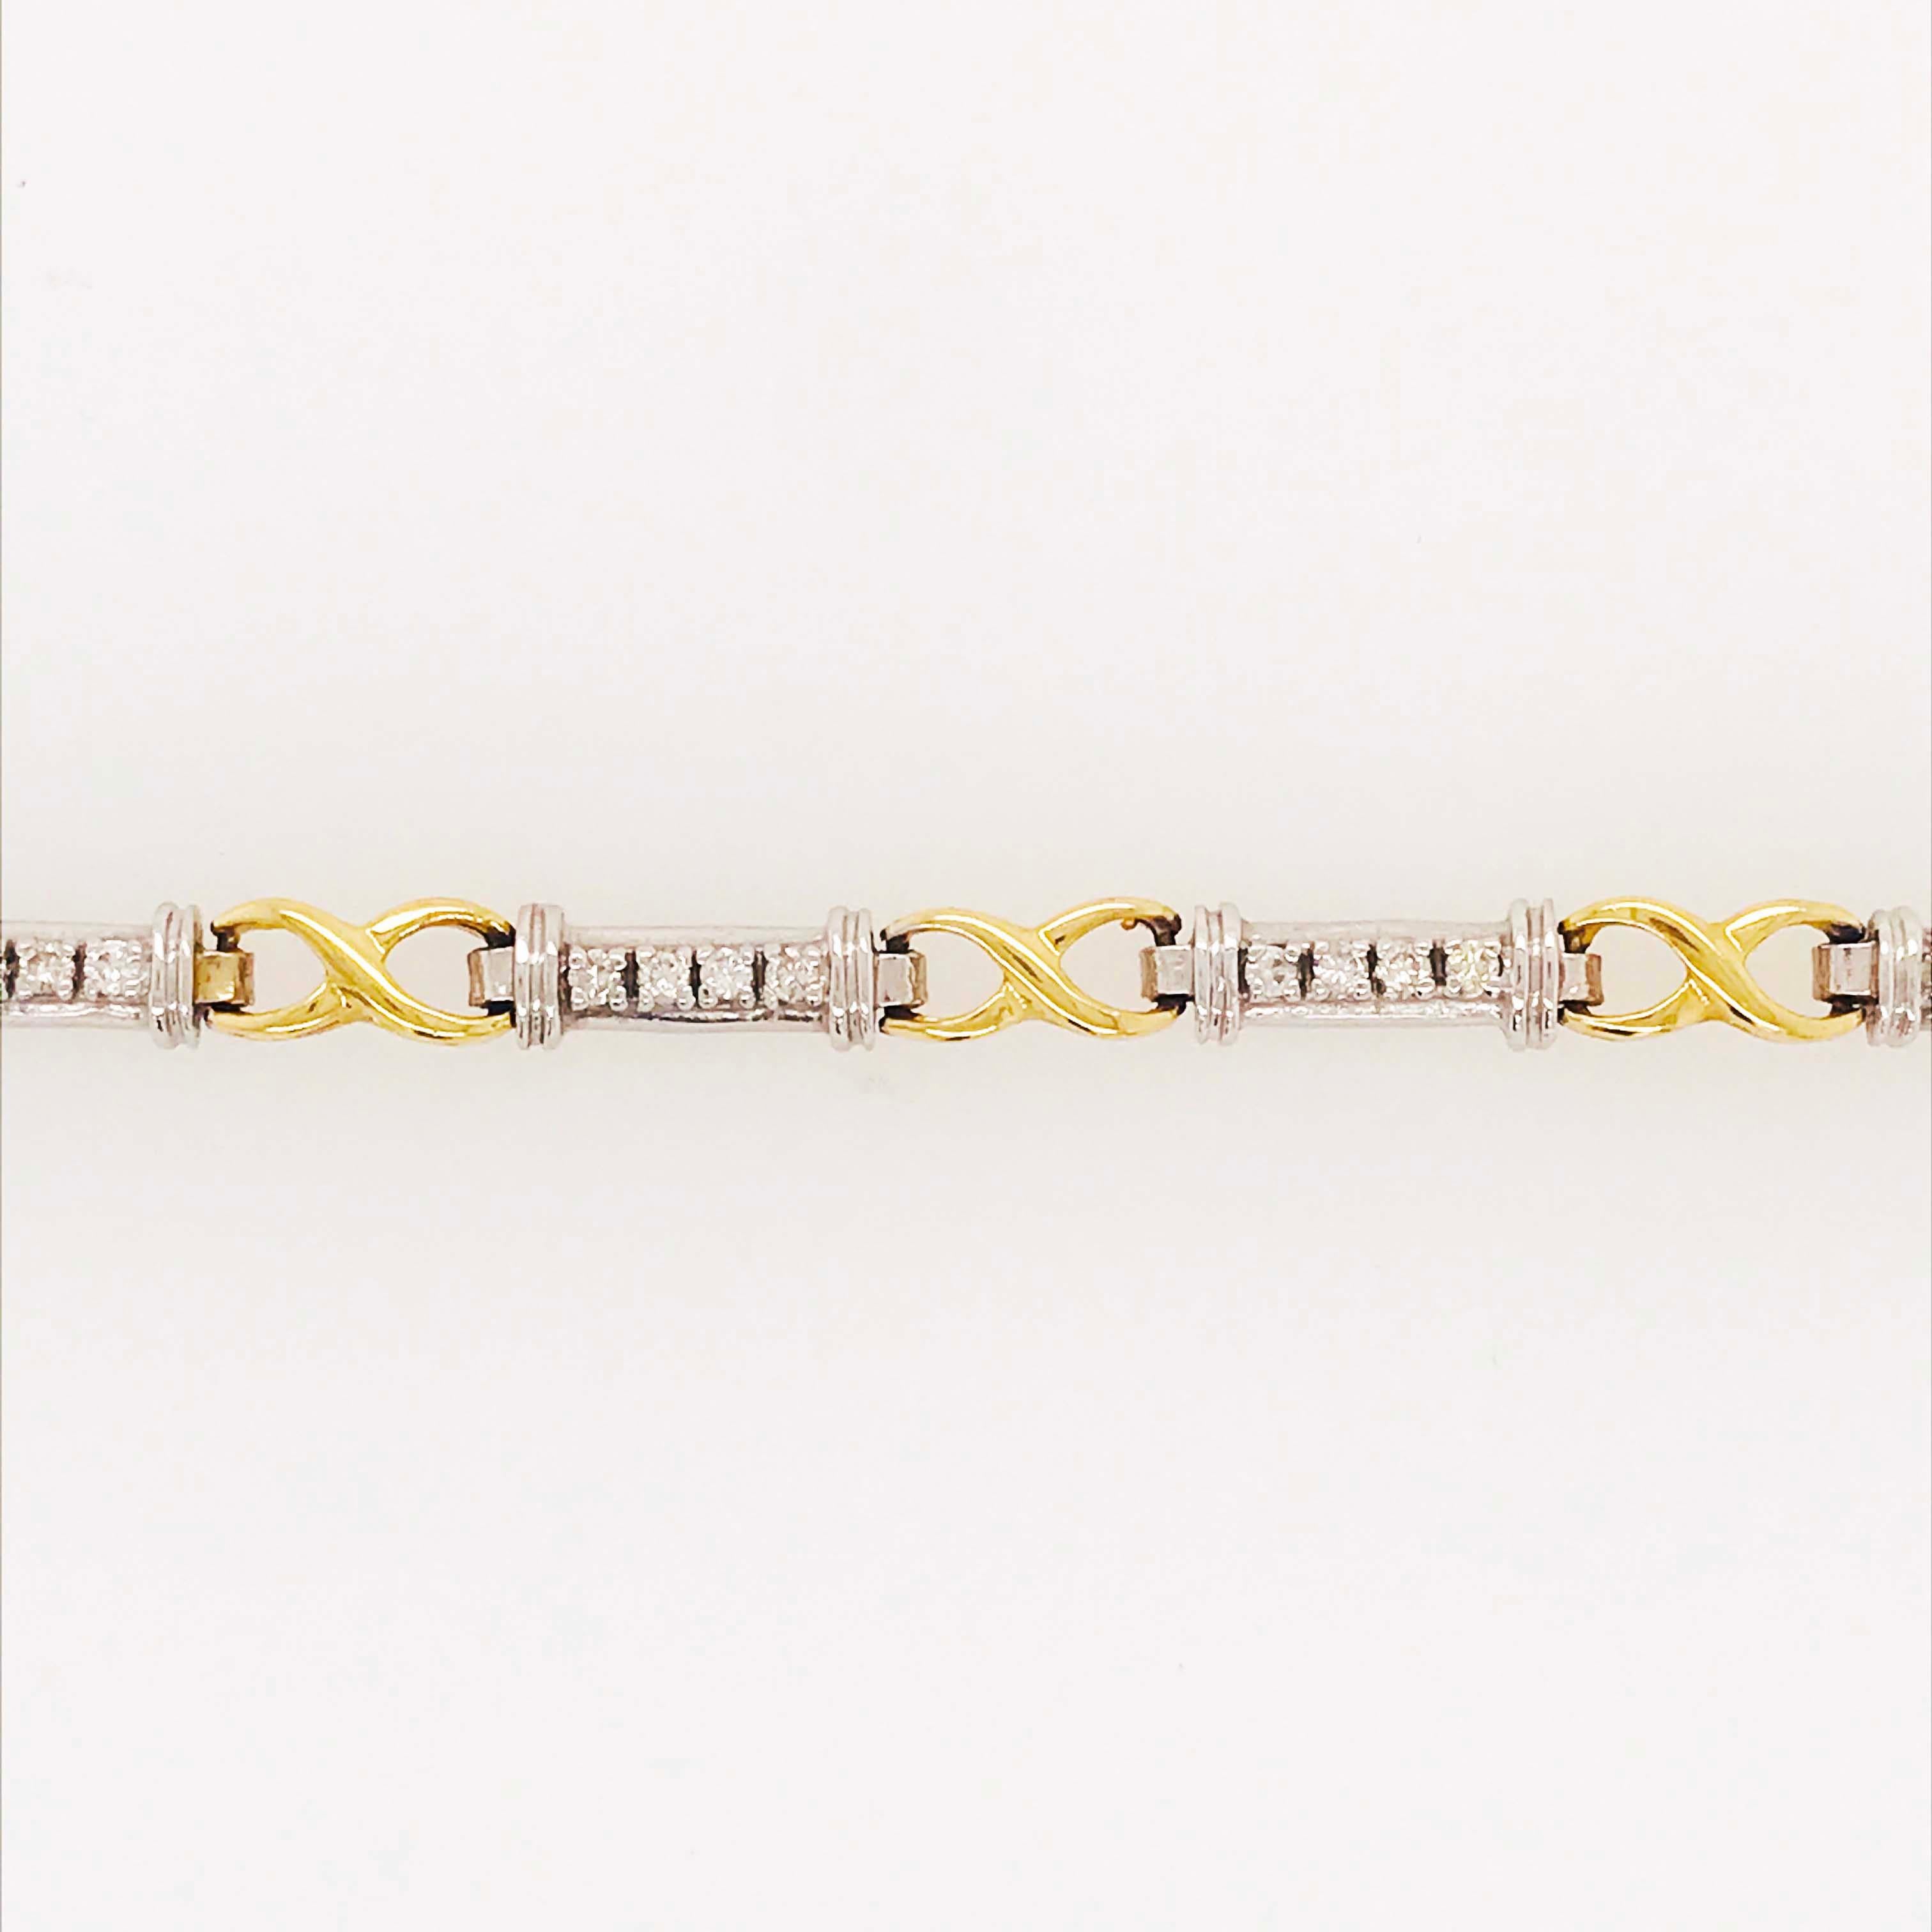 Two-Tone Diamond Bracelet with Alternating White and Yellow Gold Links 1/2 Carat 2